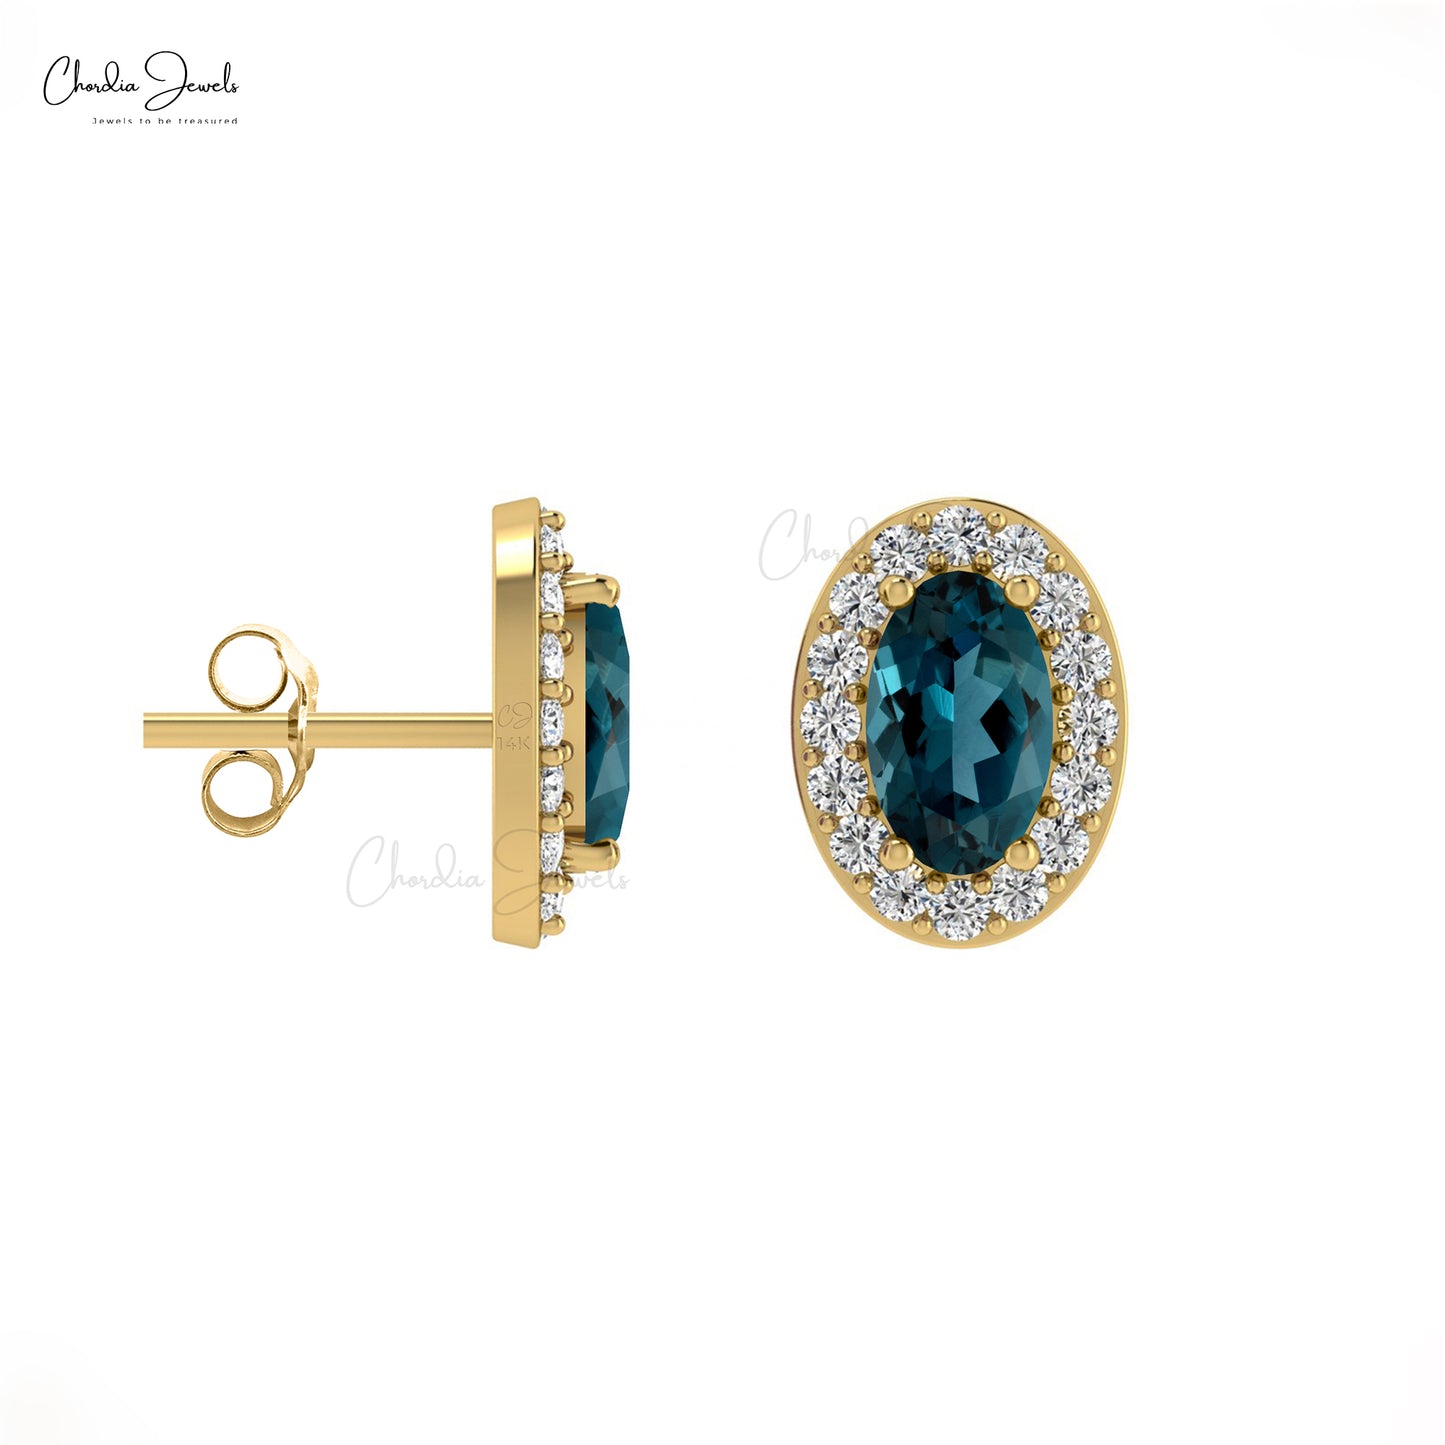 Load image into Gallery viewer, Solid 14k Gold Diamond Halo Earrings Authentic 5x3mm London Blue Topaz Studs For Wedding Gift
